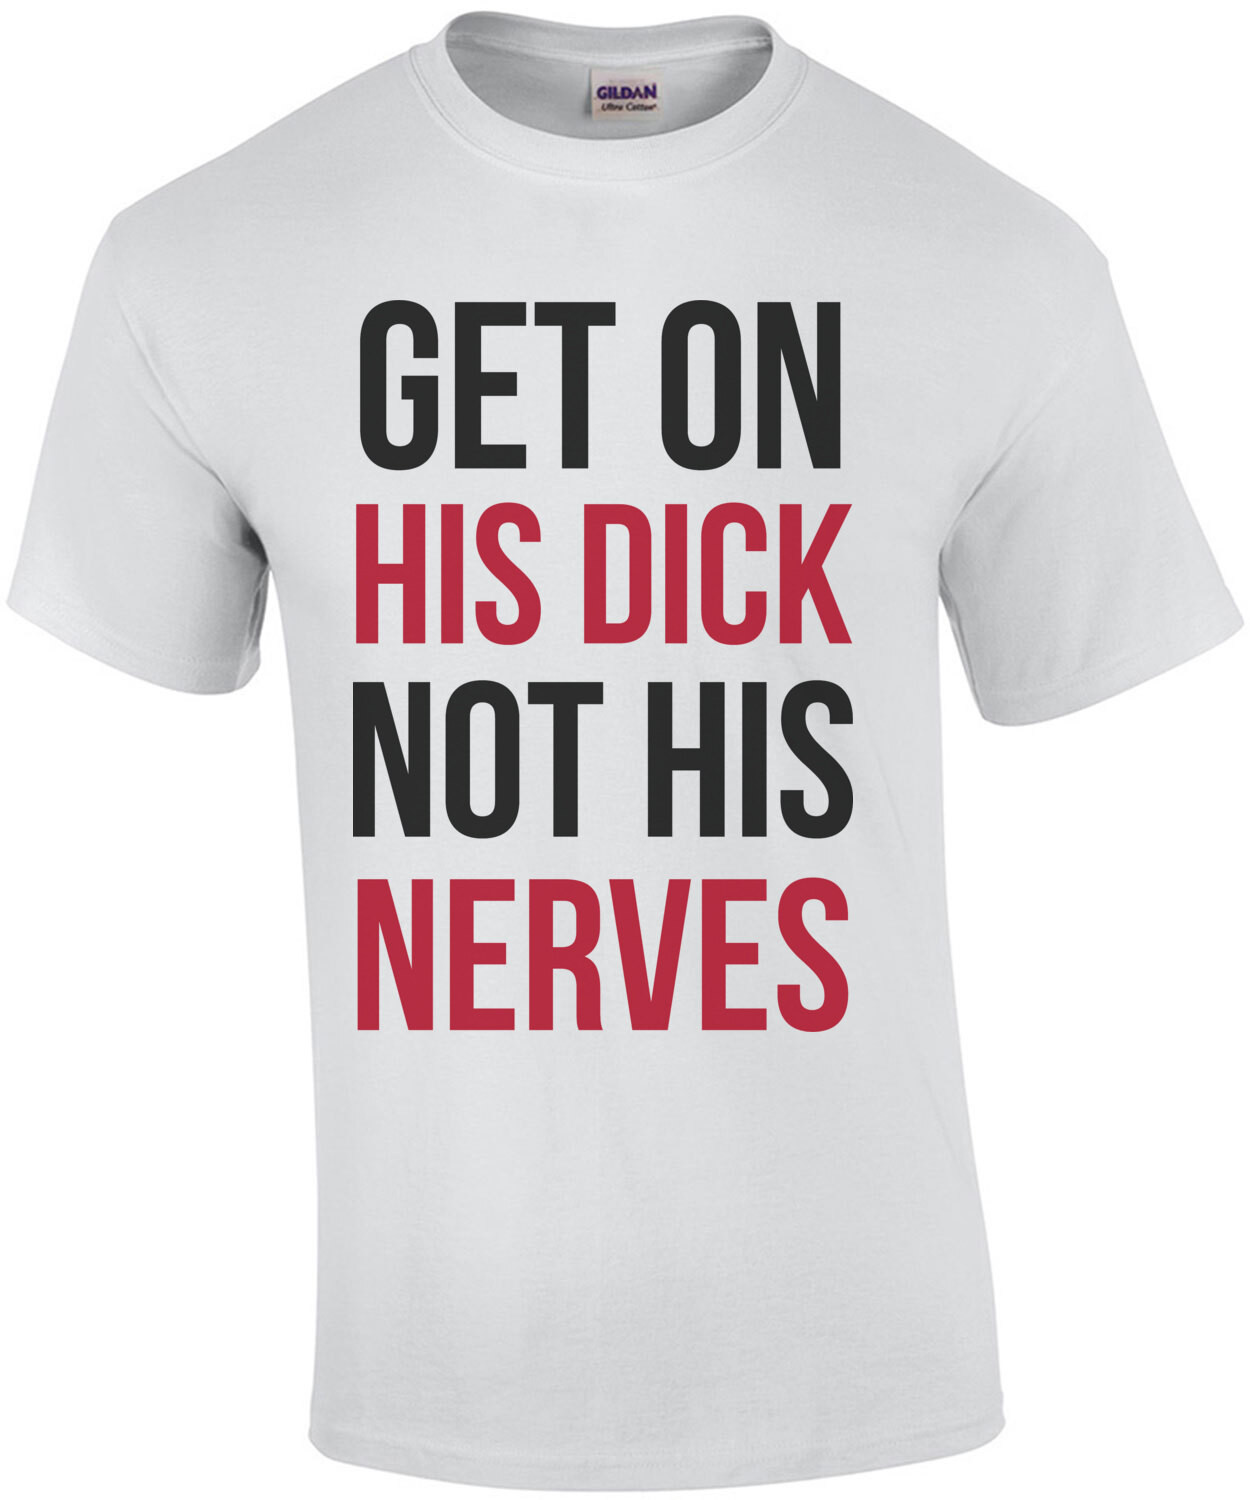 Get On His Dick Not His Nerves - funny t-shirt